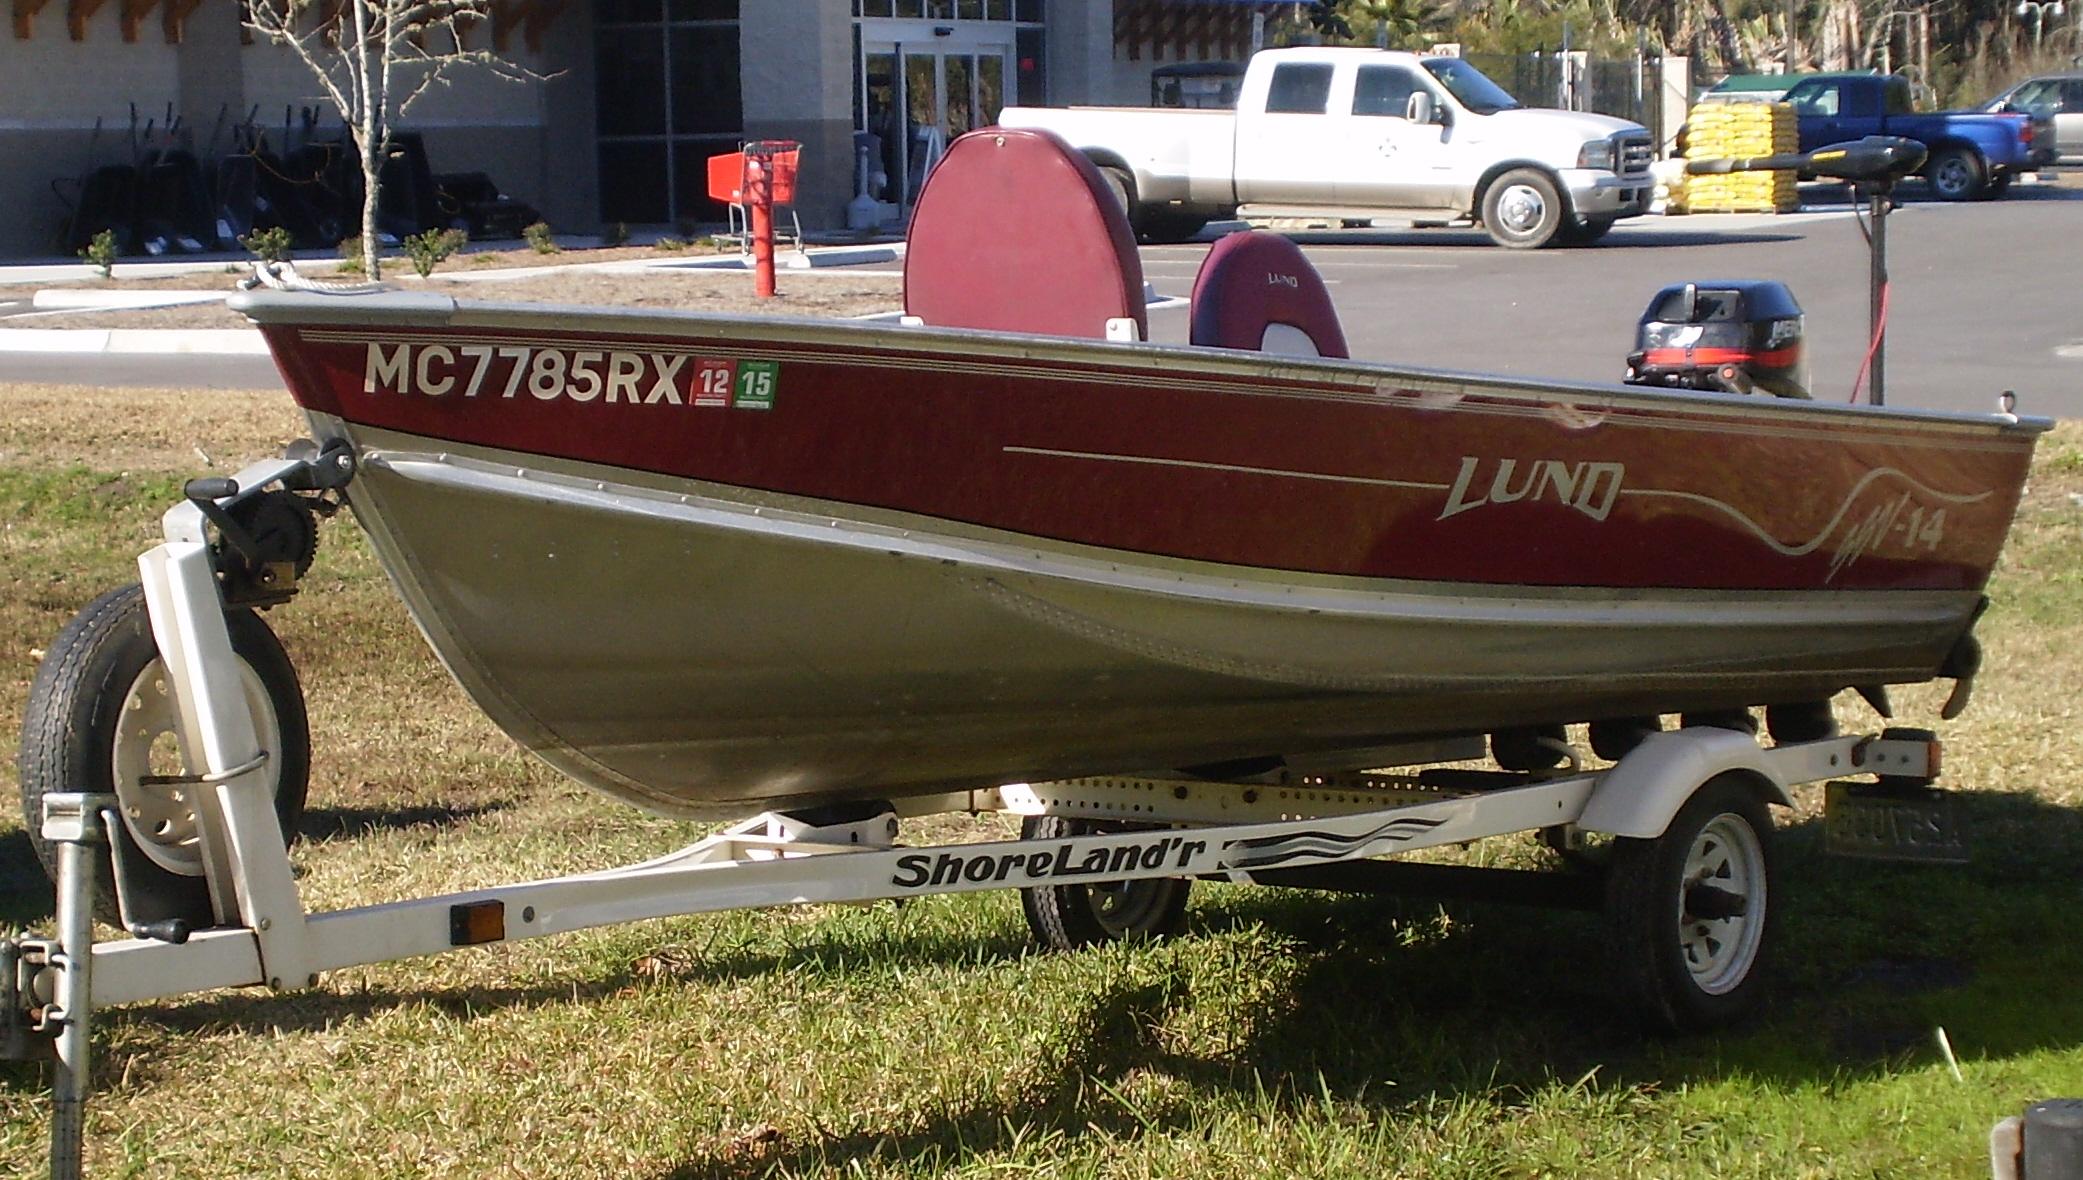 New and Used " 14 Foot Boats " for Sale in SC about 30 results